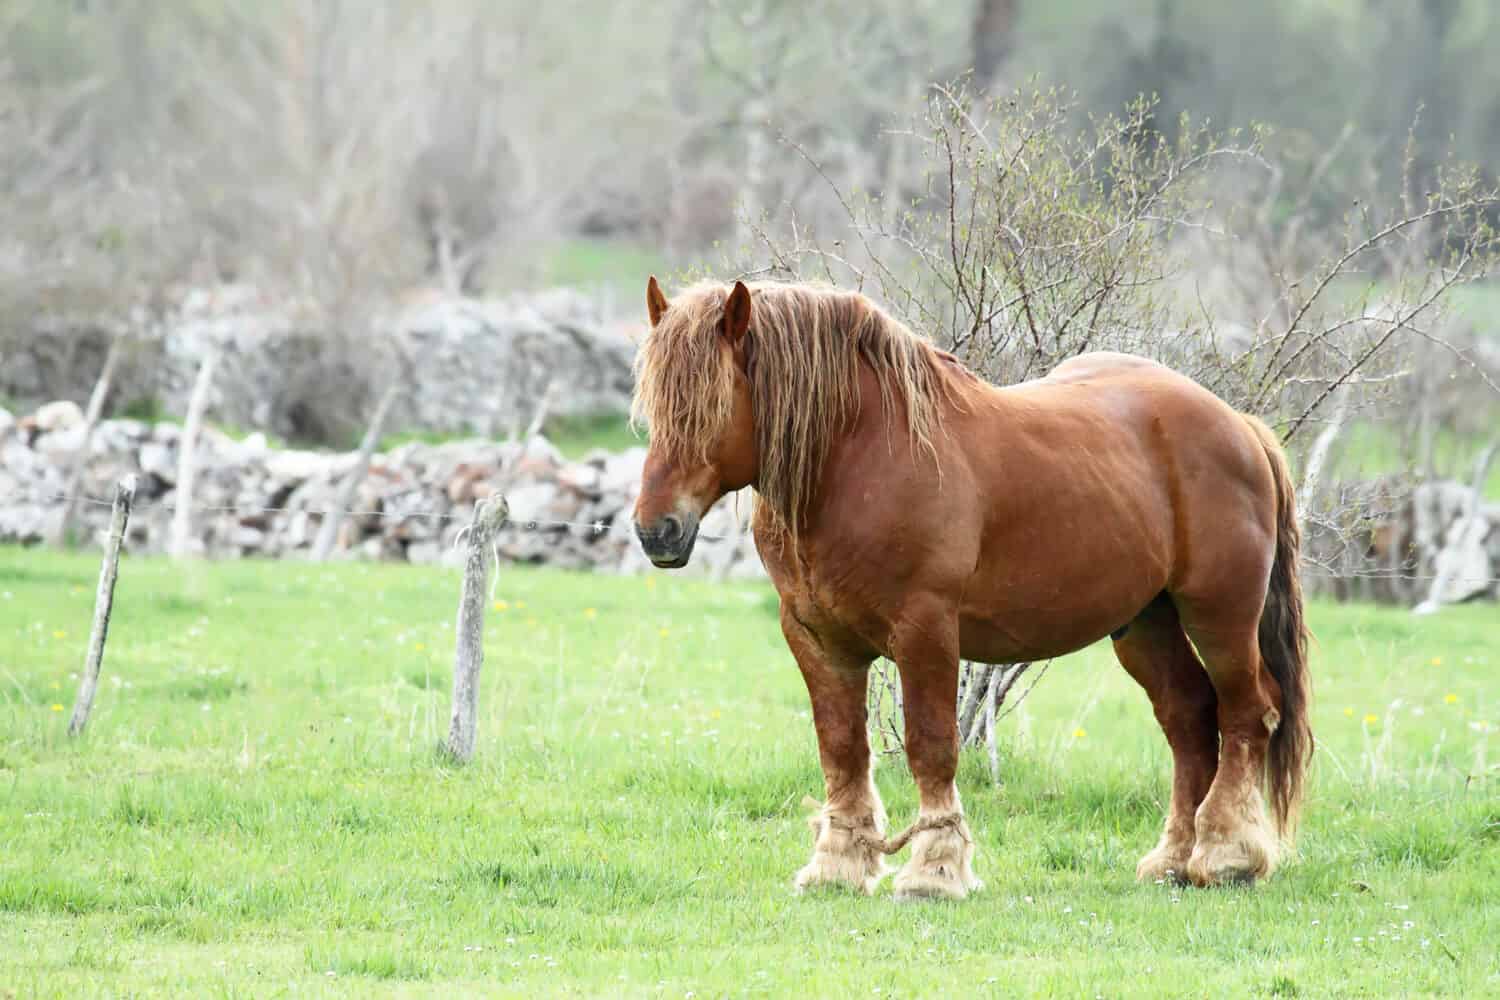 24 Types of Draft Horses Ranked By Their Enormous Size - AZ Animals